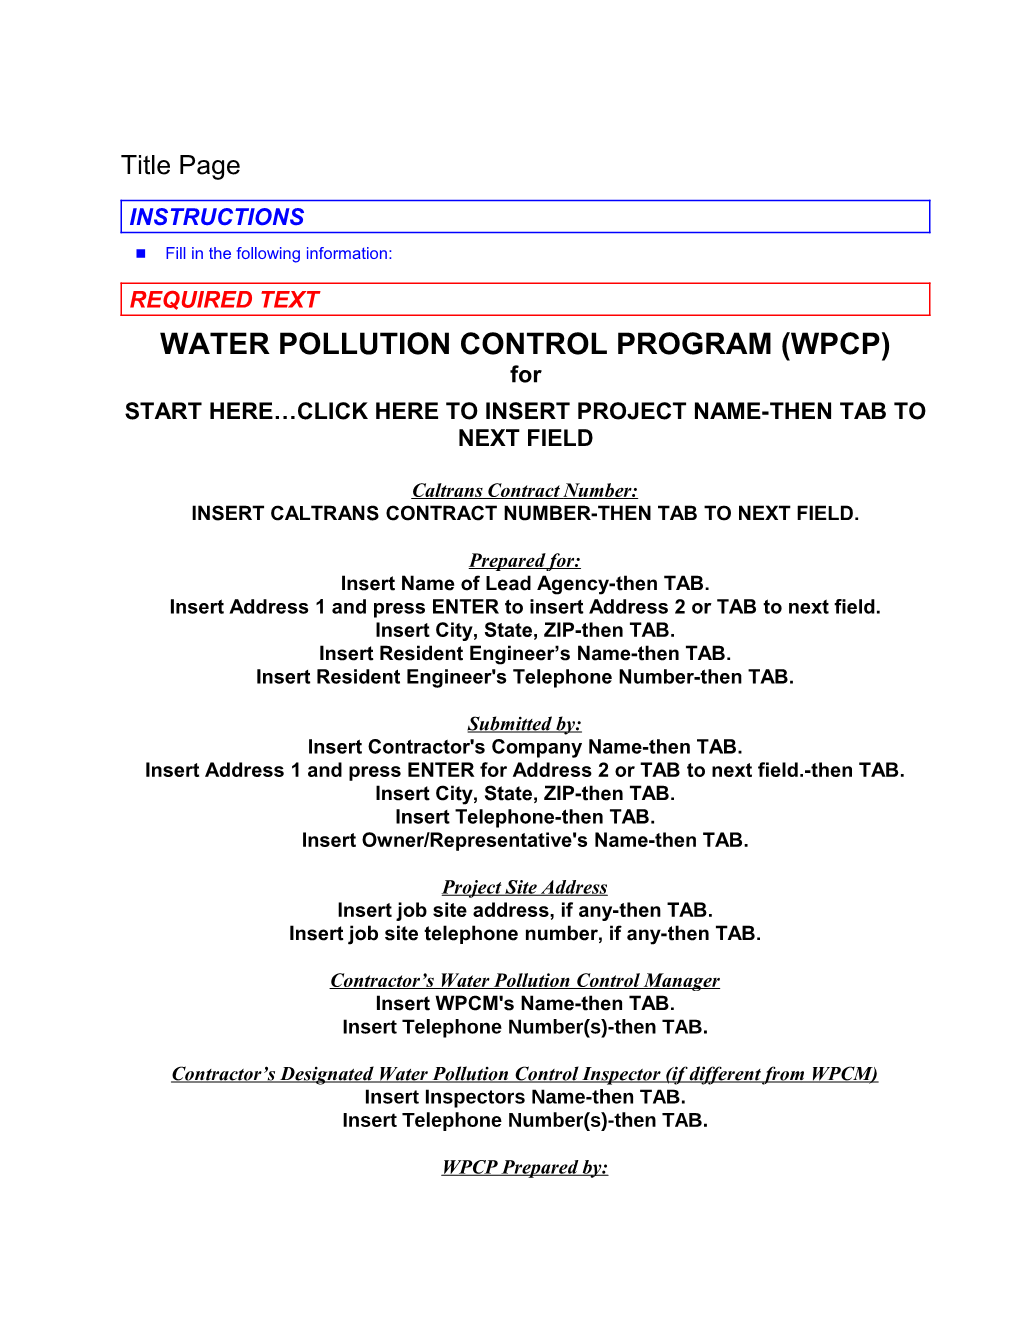 Water Pollution Control Program (WPCP)